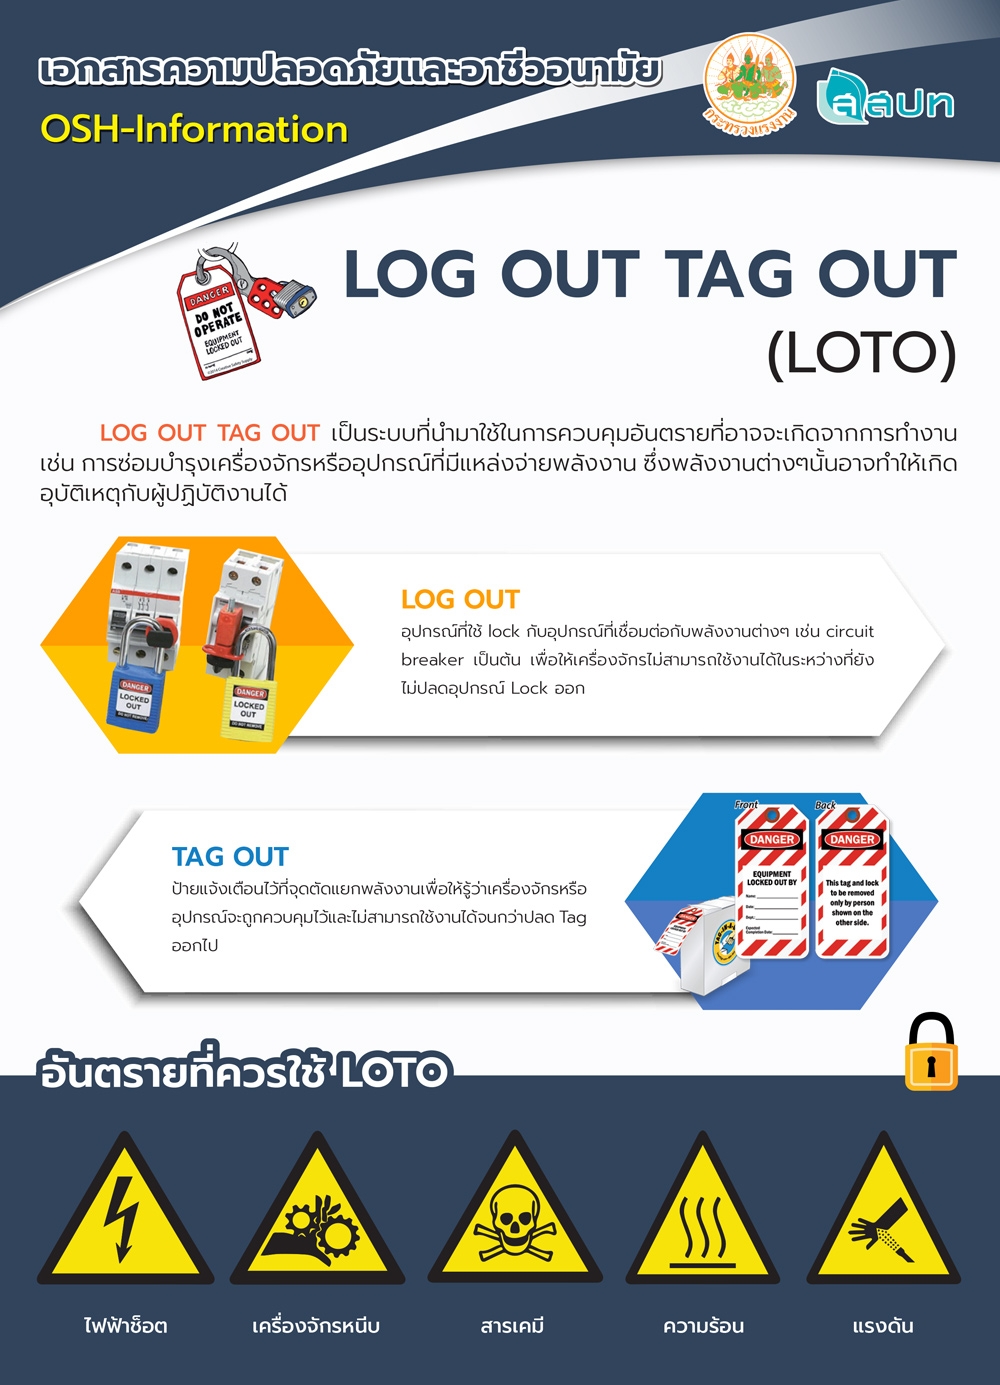 LOG OUT TAG OUT